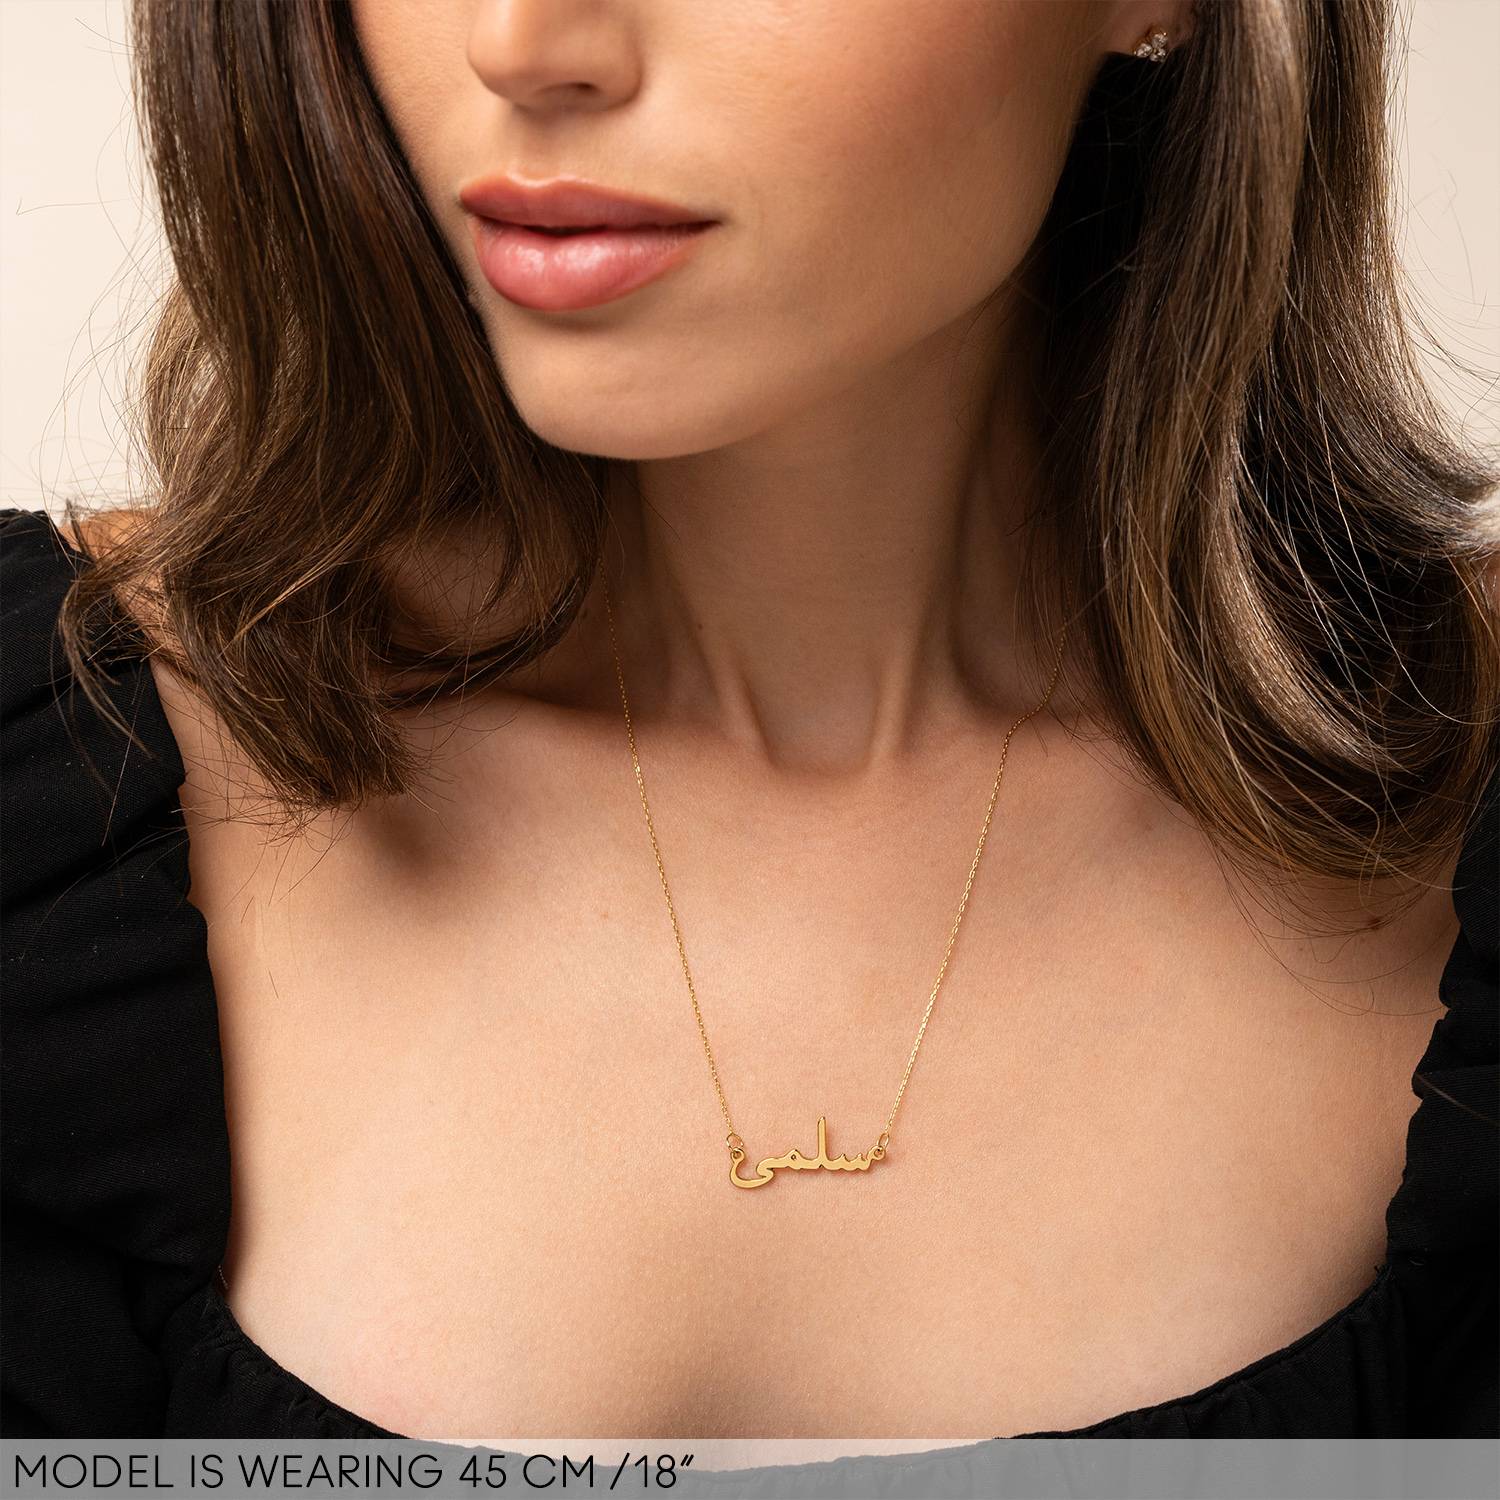 Personalized Arabic Name Necklace in 14k Yellow Gold-4 product photo